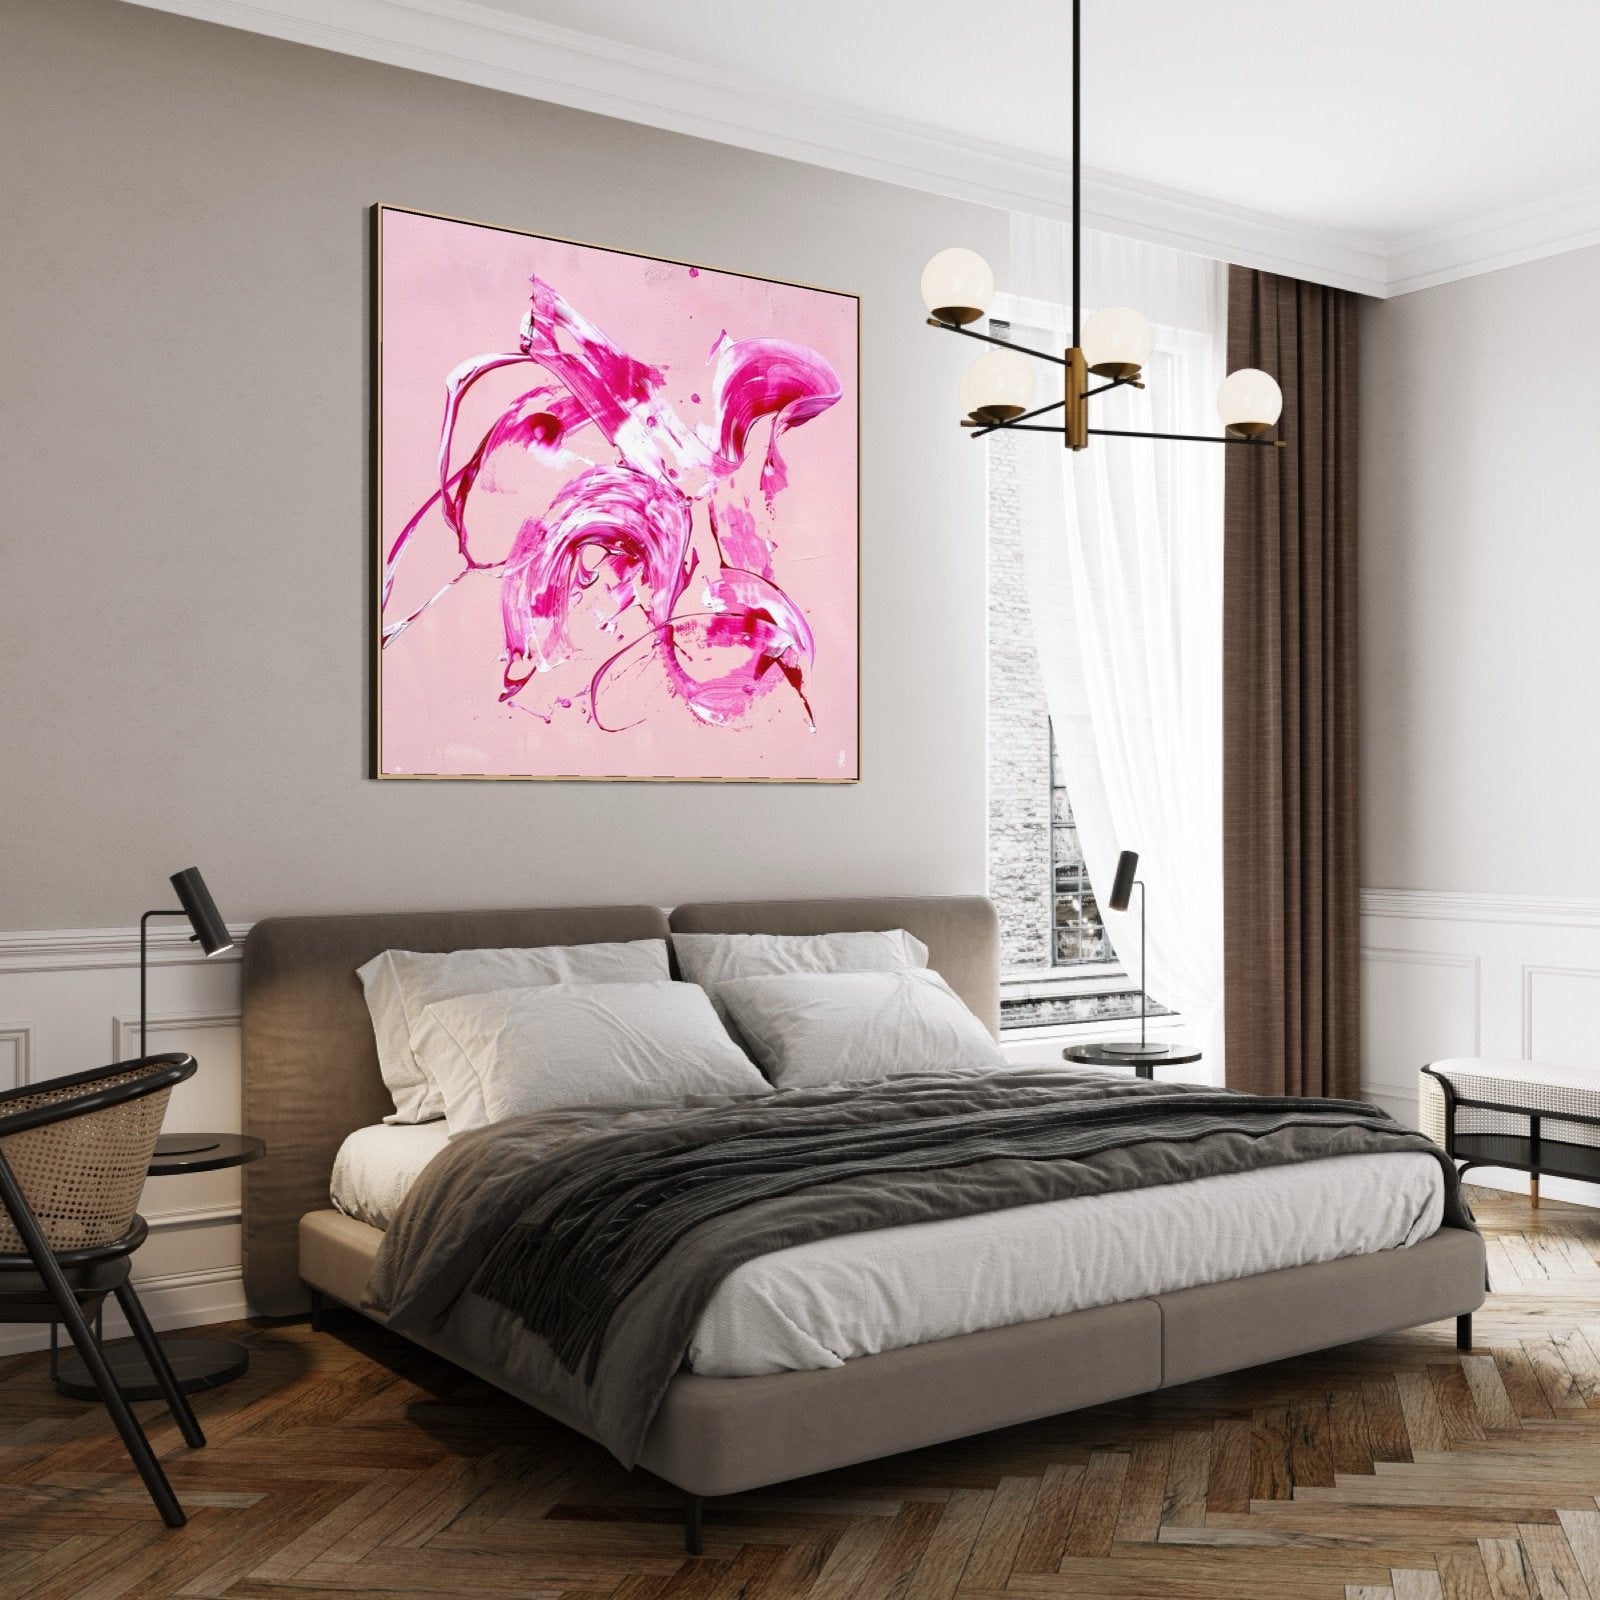 Canvas print: "Less Is More #1"